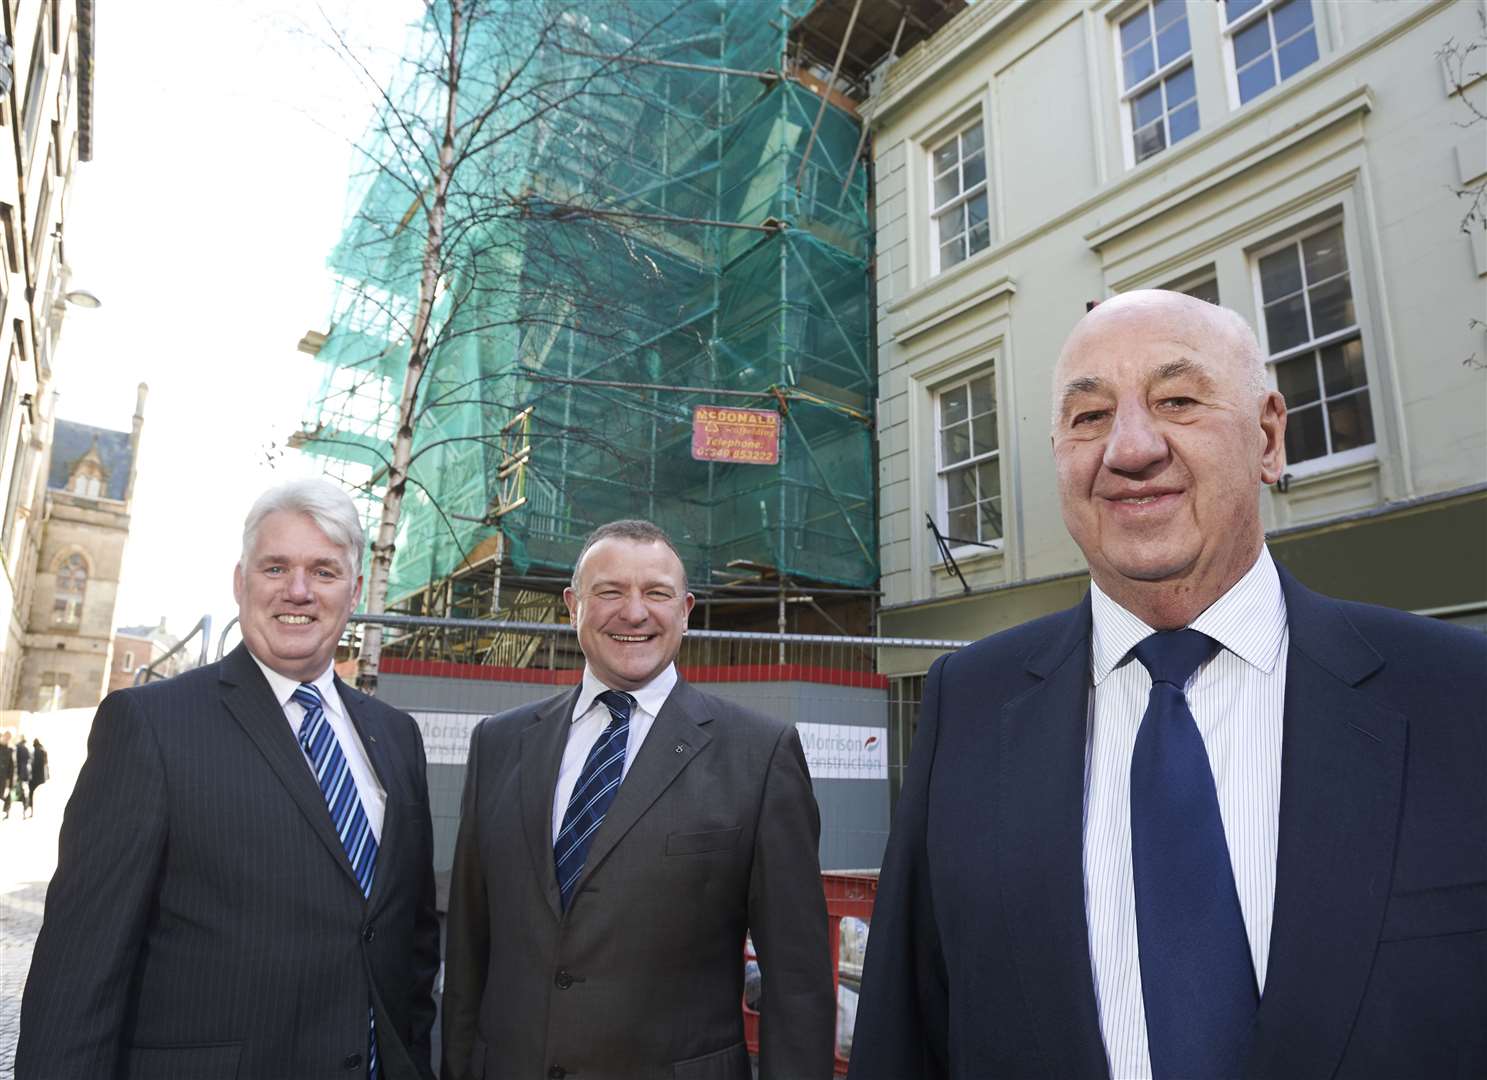 From left: Councillor Ian Brown, MP Drew Hendry and John McClelland (Skills Development Scotland) visit the building during the work at 1-5 Church Street.